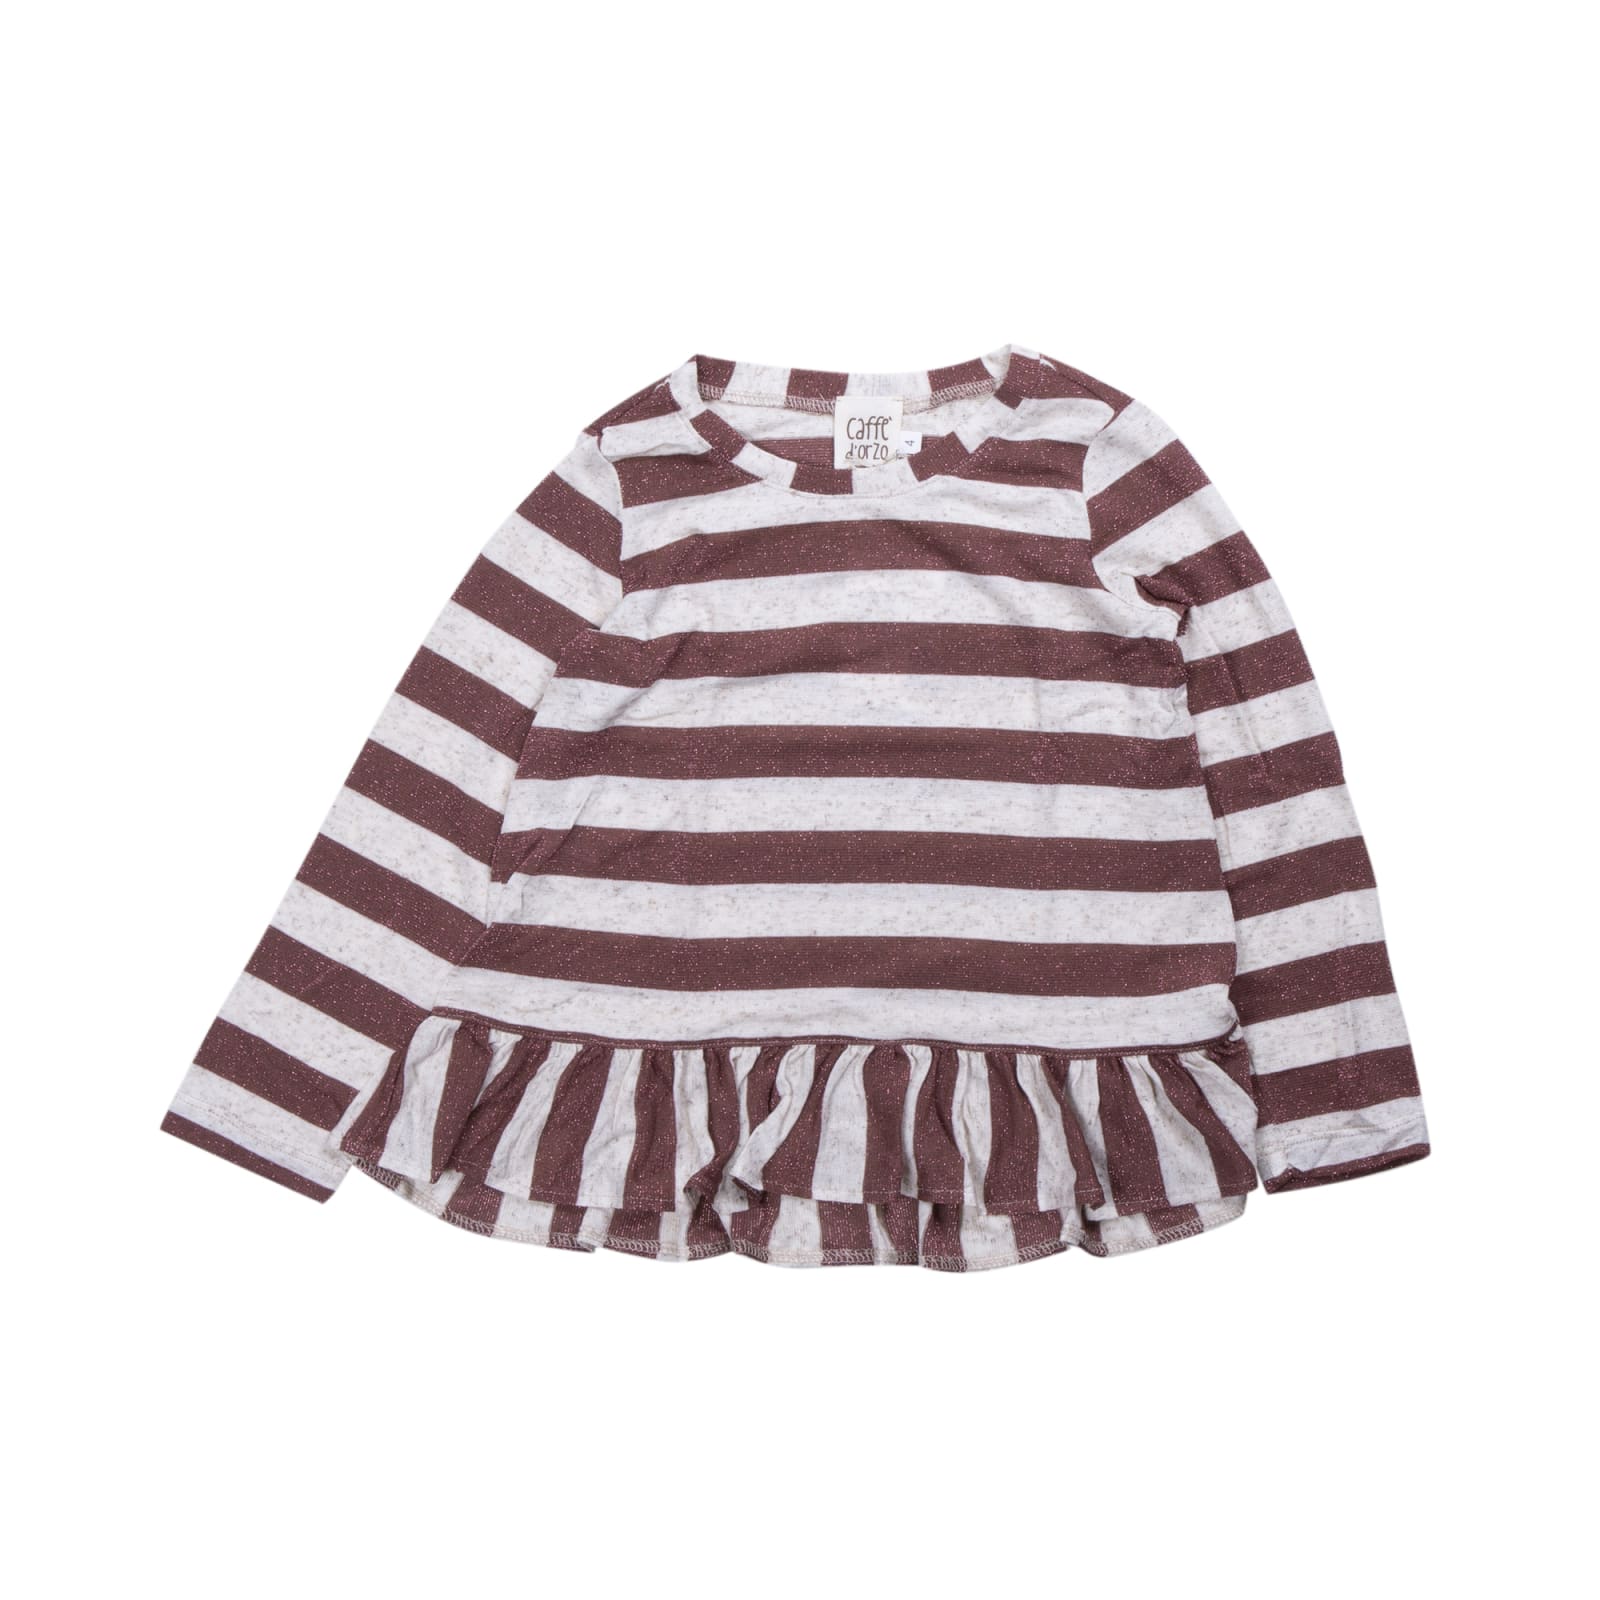 Caffe' D'orzo Babies' T-shirt In Rosa